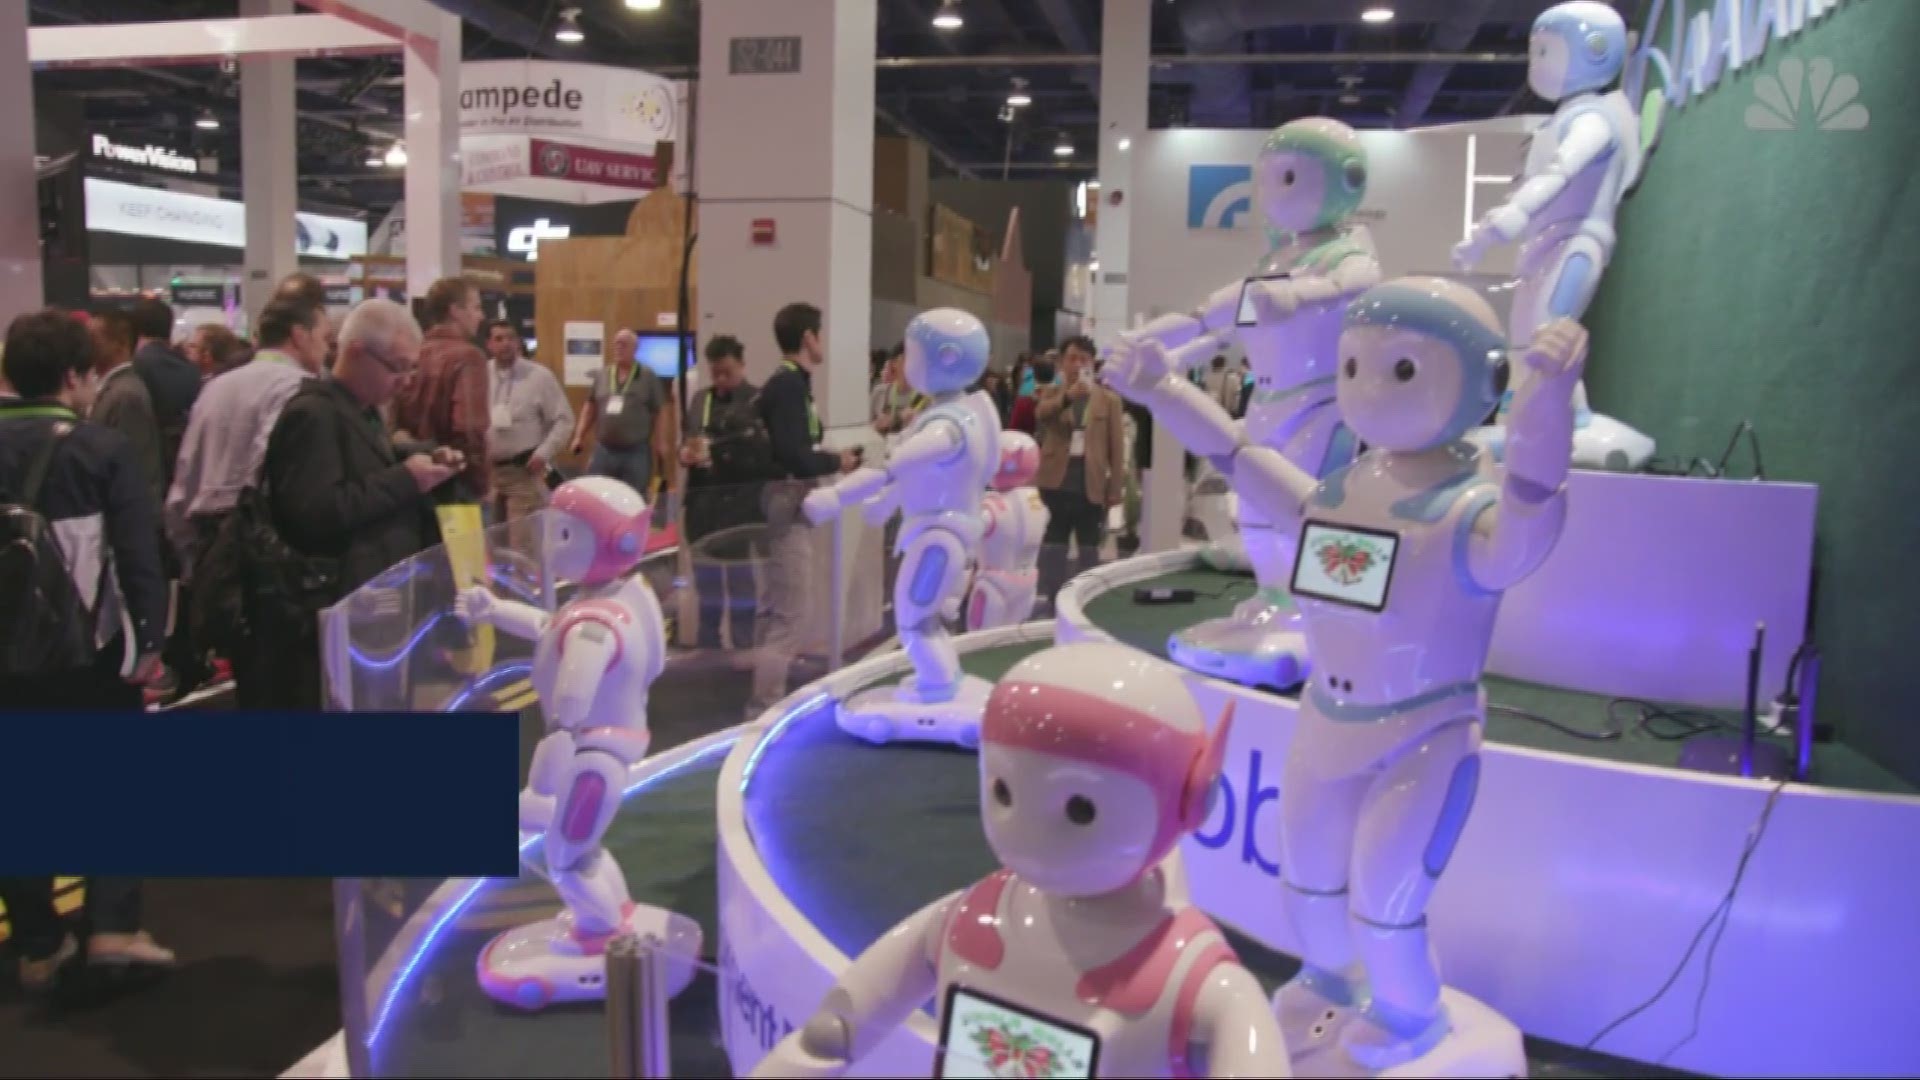 More than 180,000 people are in Las Vegas for the annual Consumer Electronics Show, whereh robots and artificial intelligence are in the spotlight. NBC's Liz McLaughlin reports.